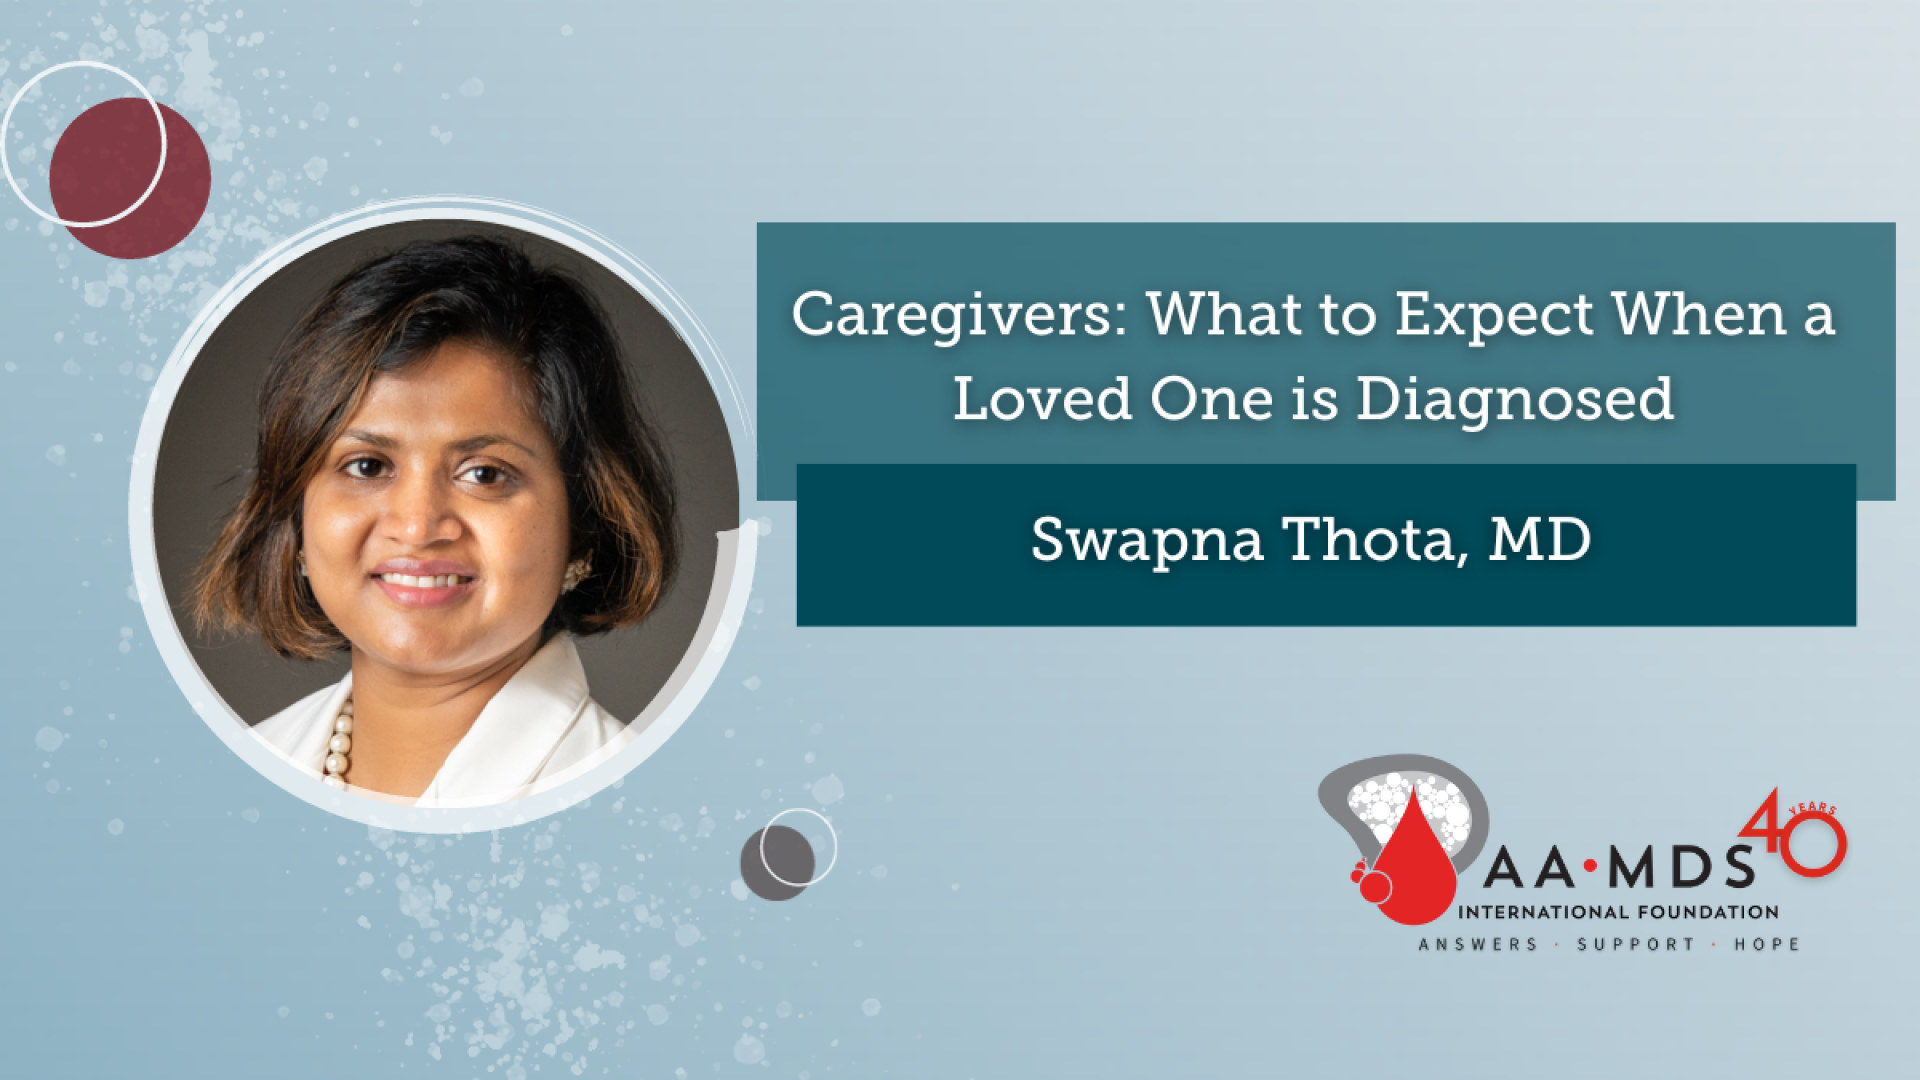 What to expect when a loved one is diagnosed for caregivers